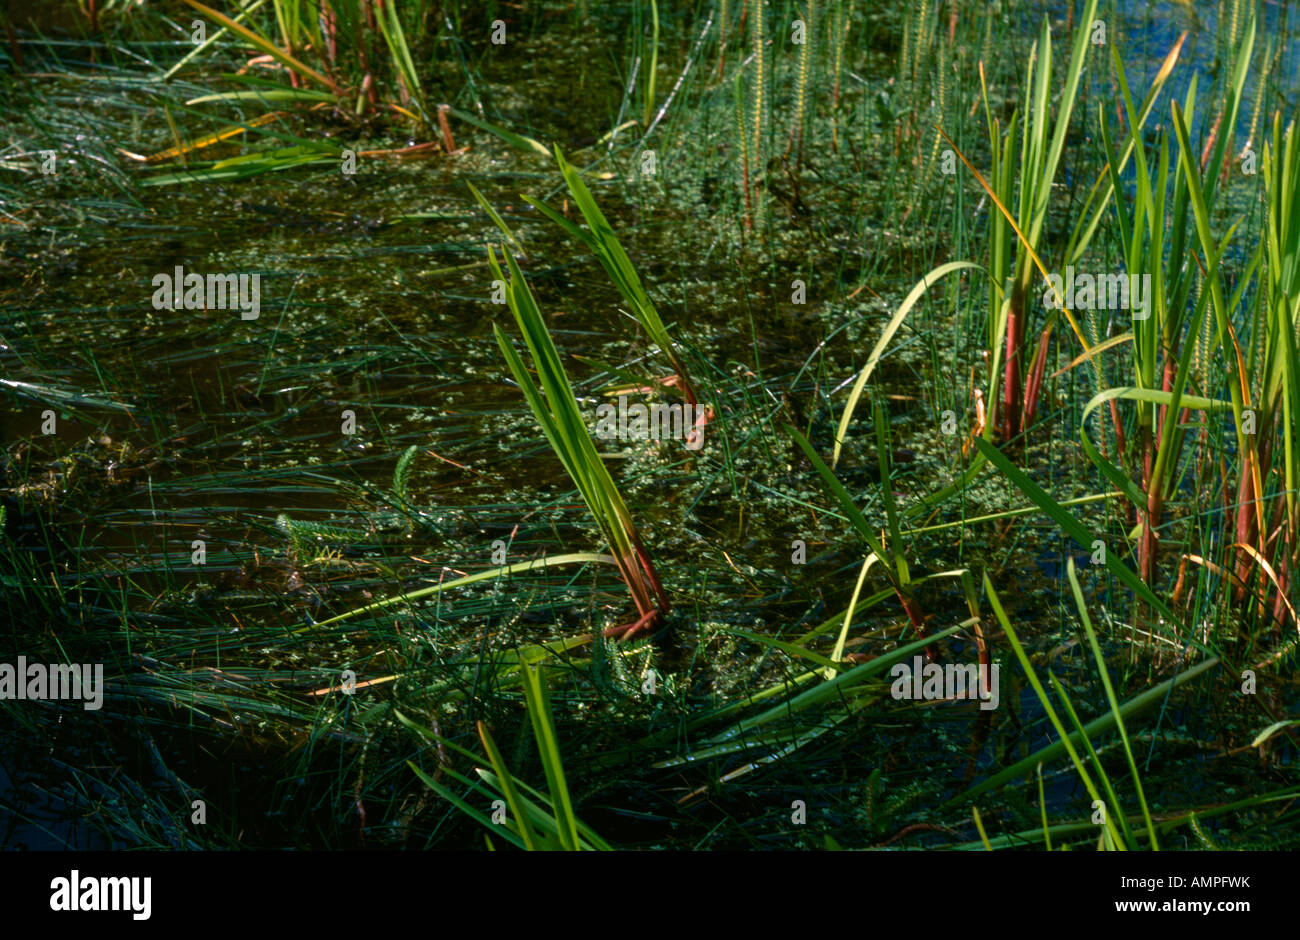 Pond Weed & Reeds Carshalton Ponds Surrey Duck Weed Stock Photo